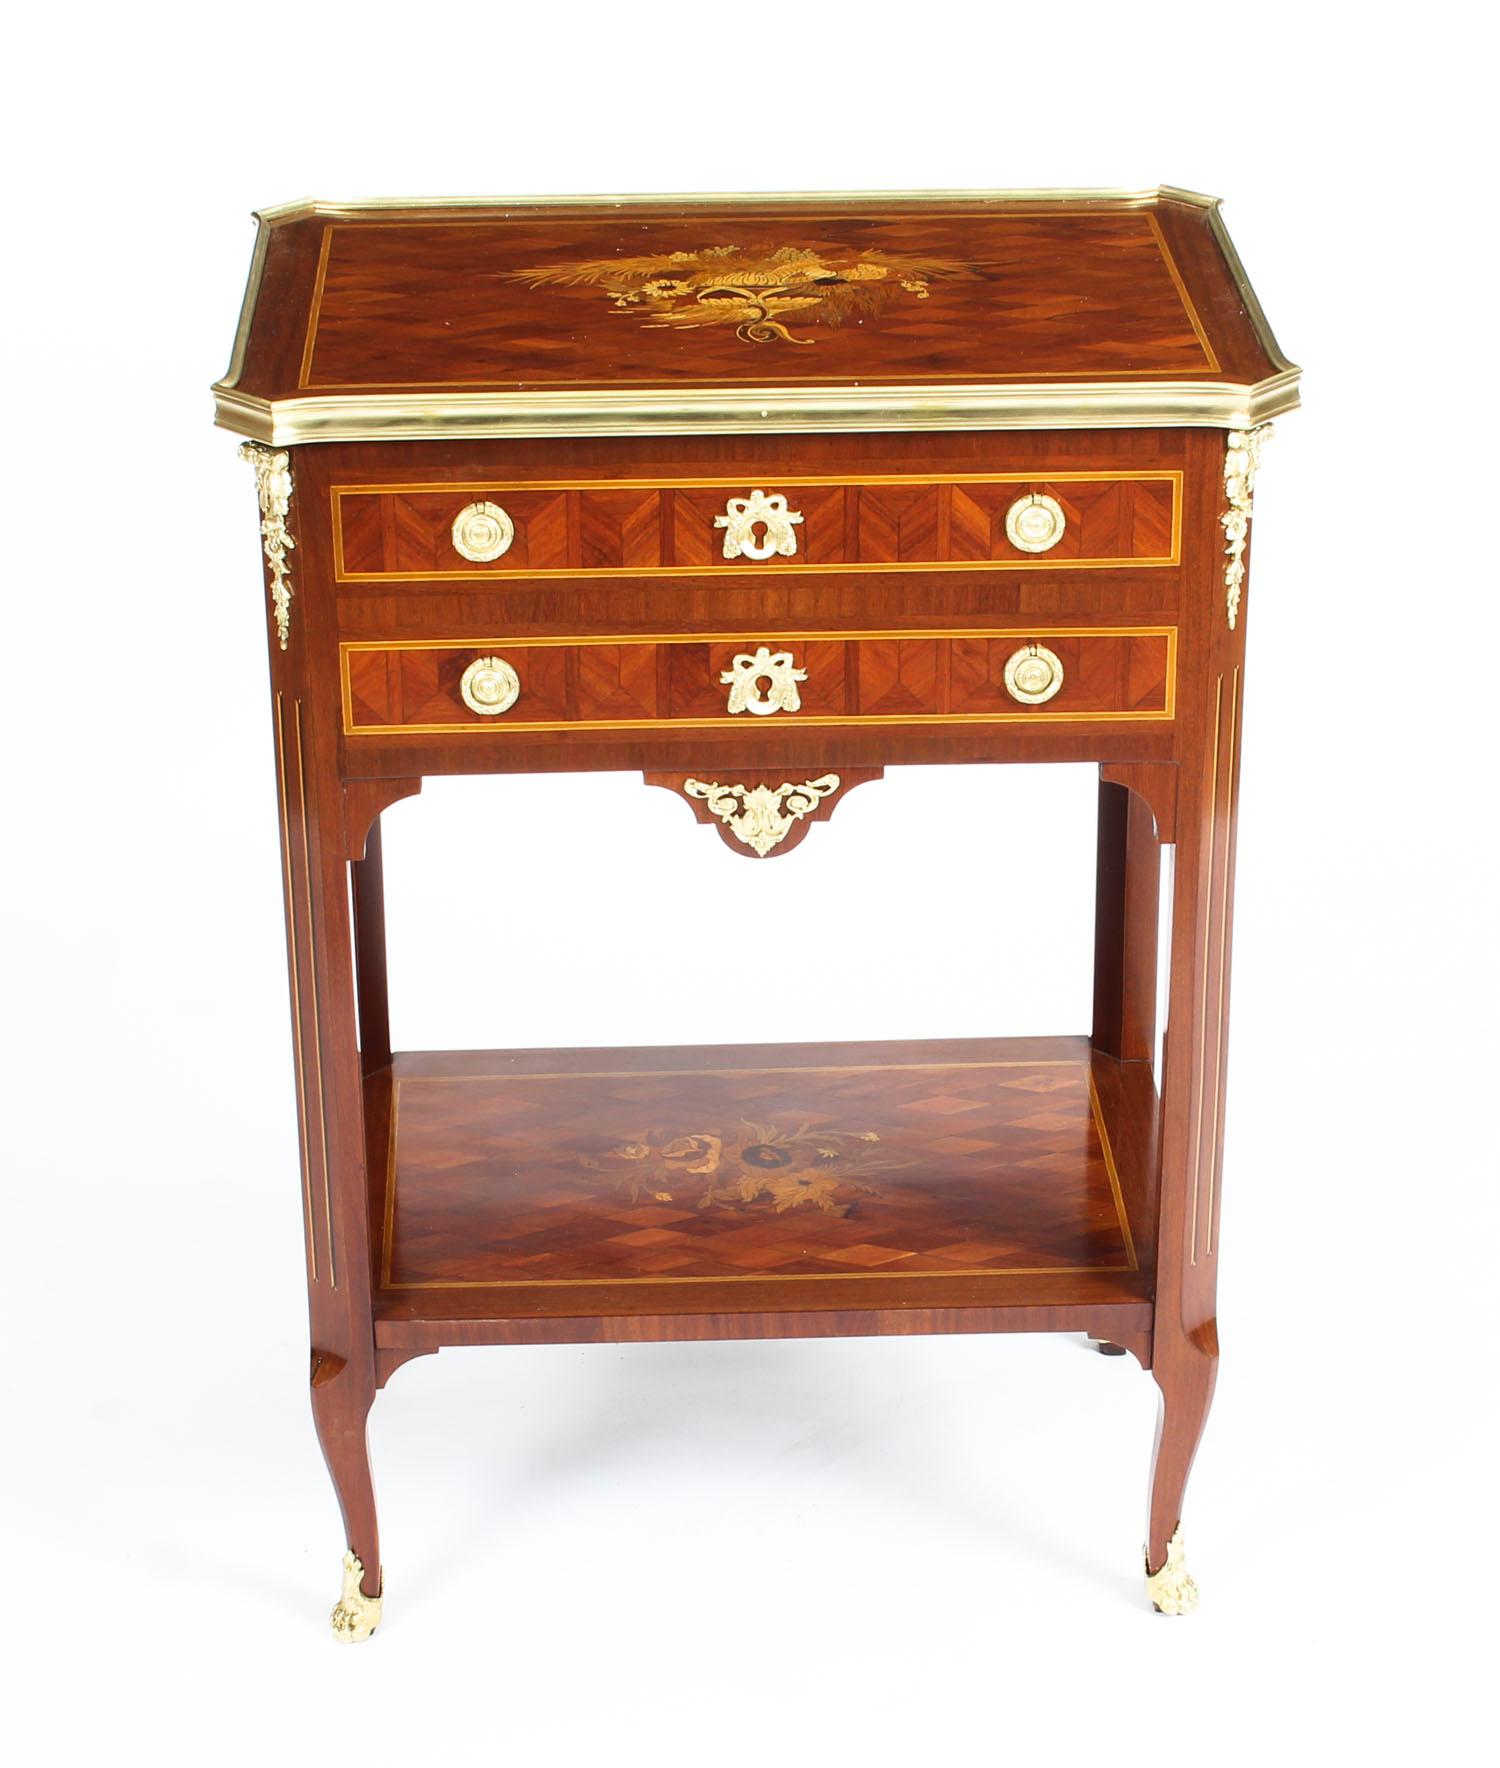 French Parquetry and Marquetry Table En Chiffonière Work Table, 19th Century For Sale 13